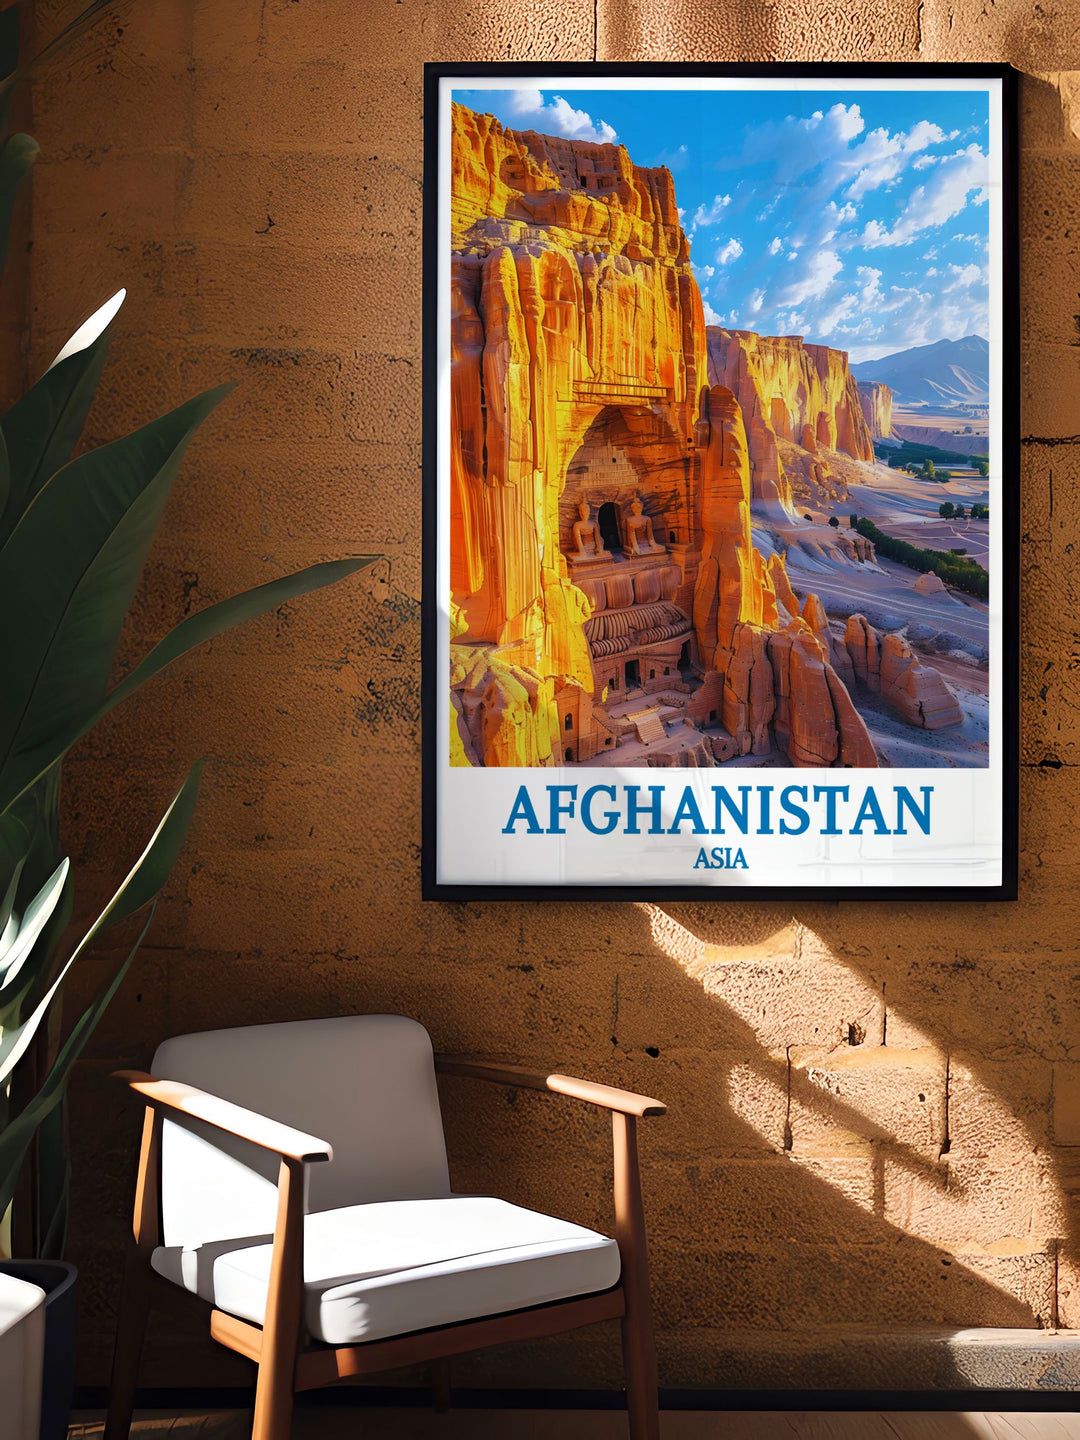 A stunning Afghanistan Poster featuring The Bamiyan Buddha Statues captured in fine line print offering a colorful and detailed representation perfect for art enthusiasts and collectors